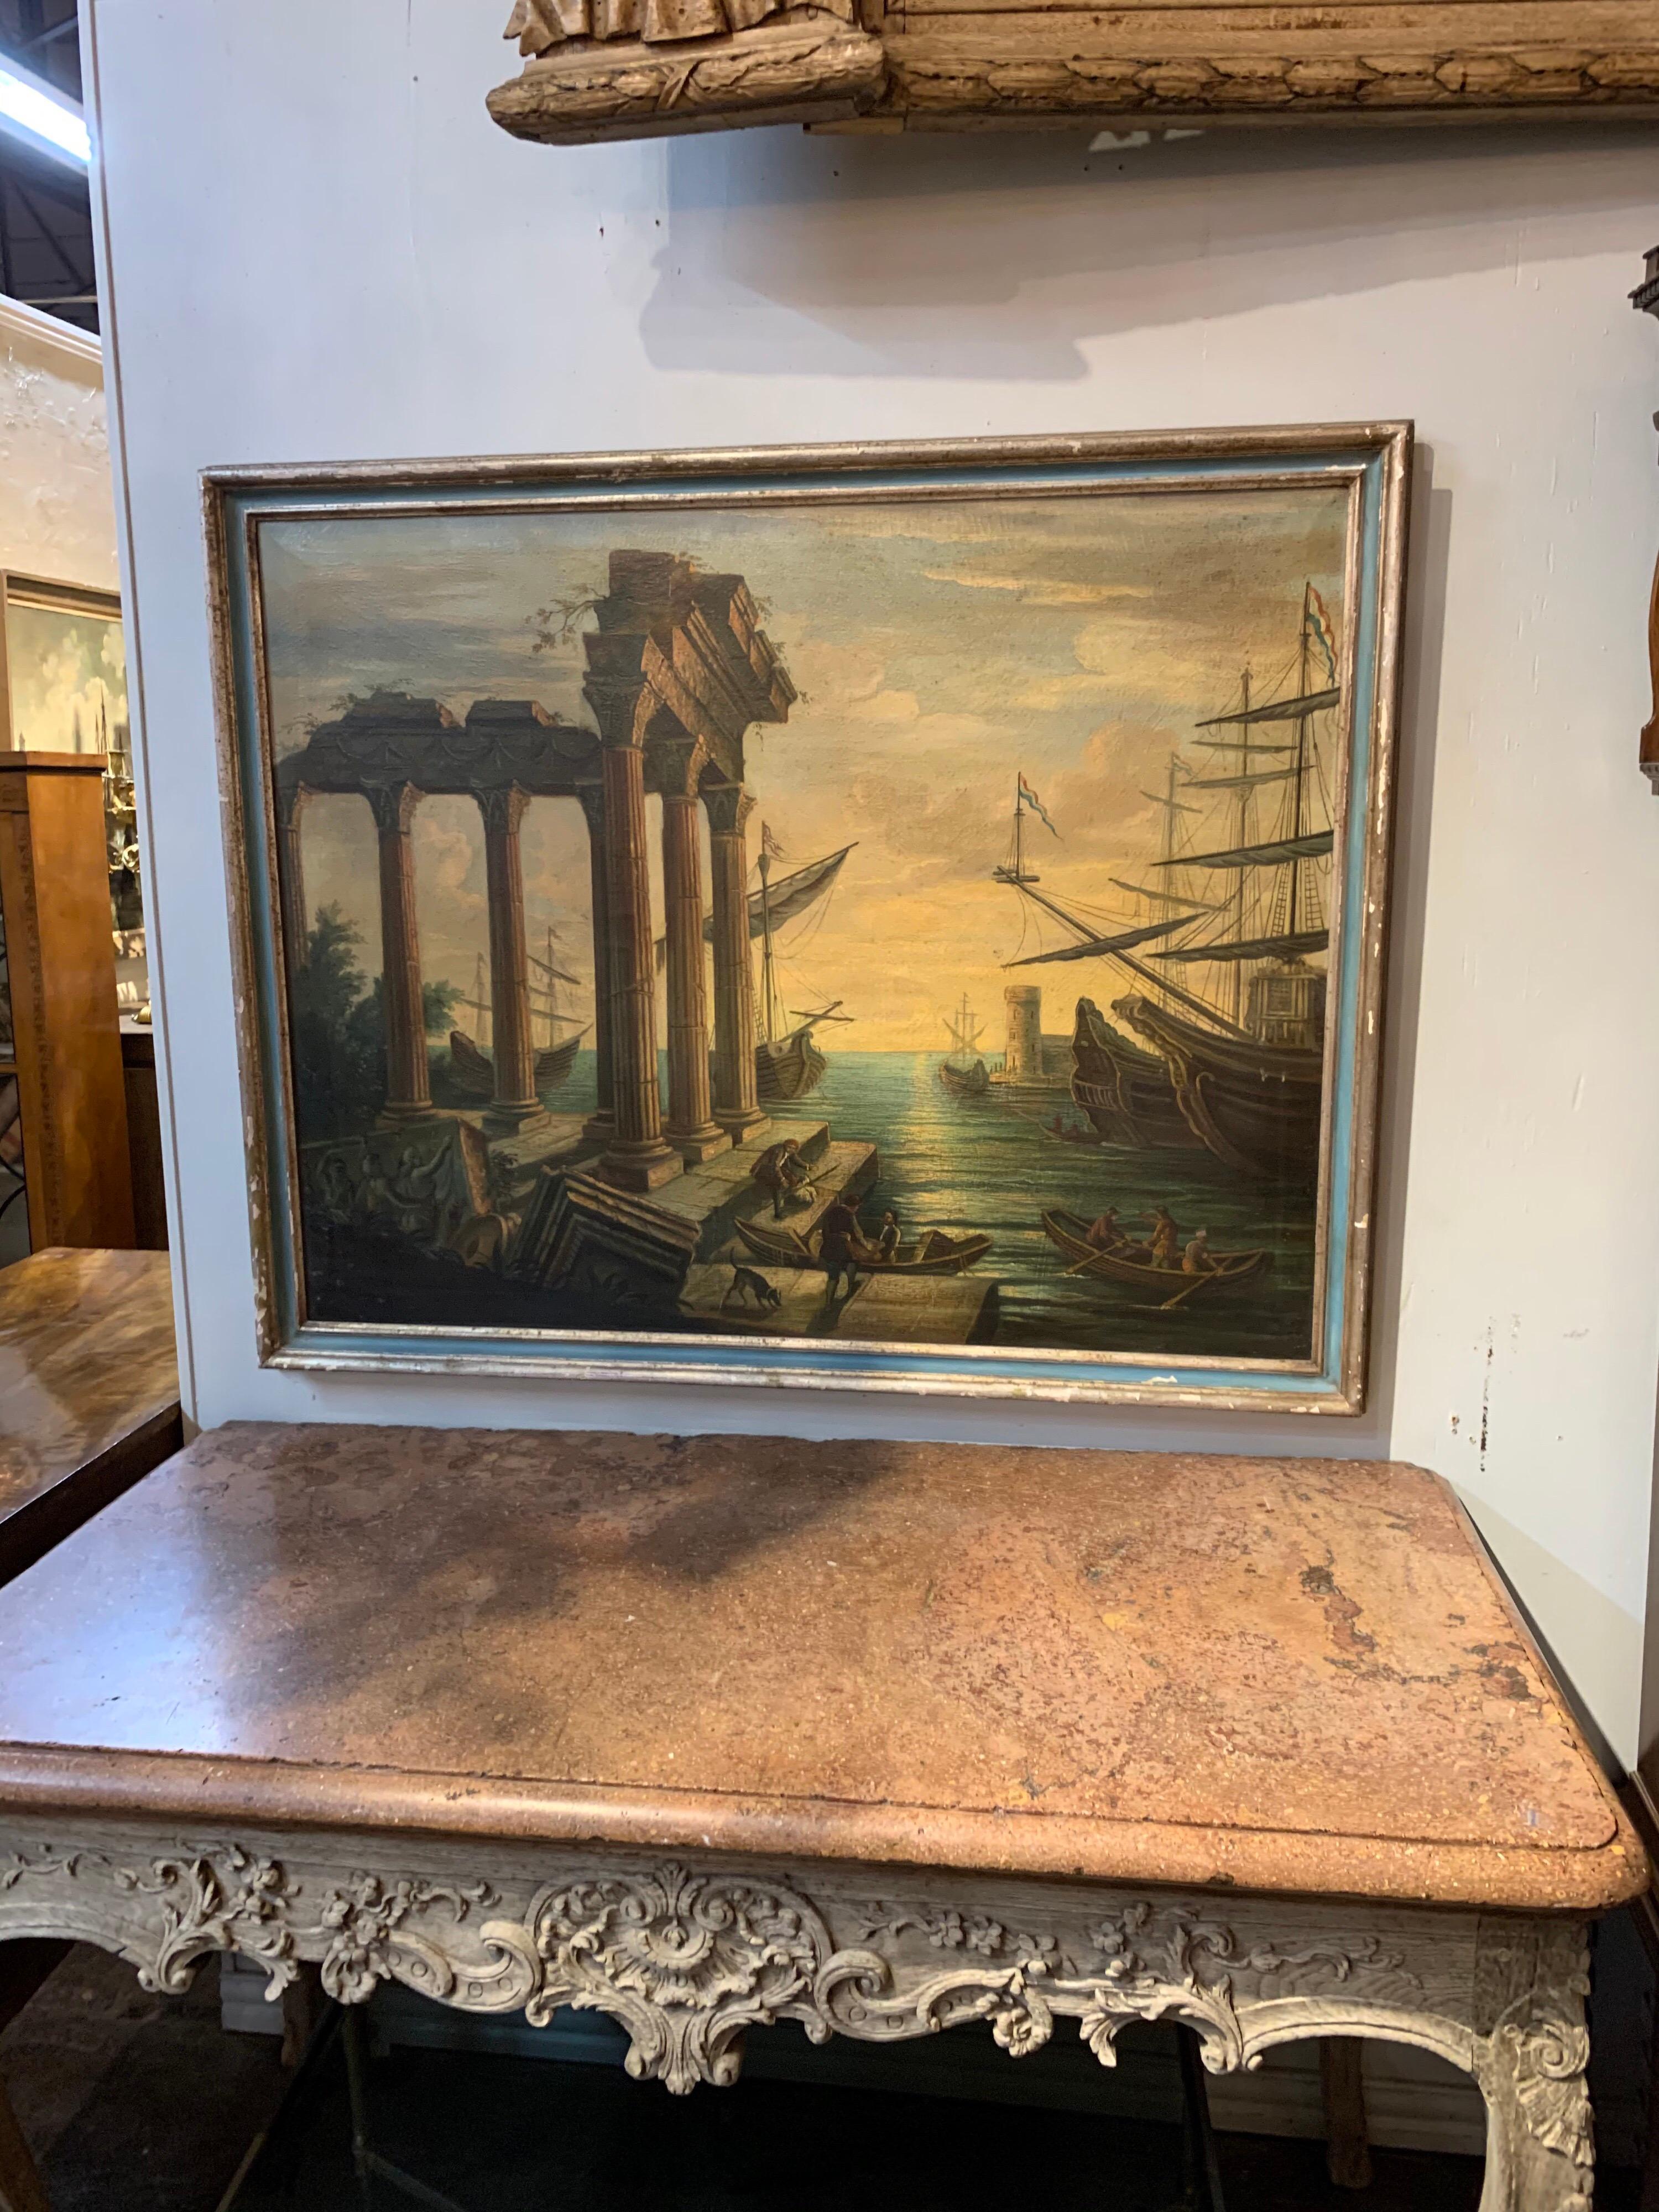 Beautiful 19th century Italian oil painting on canvas. This piece depicts a harbor scene, along with some Roman columns. An interesting painting with a lot of depth.